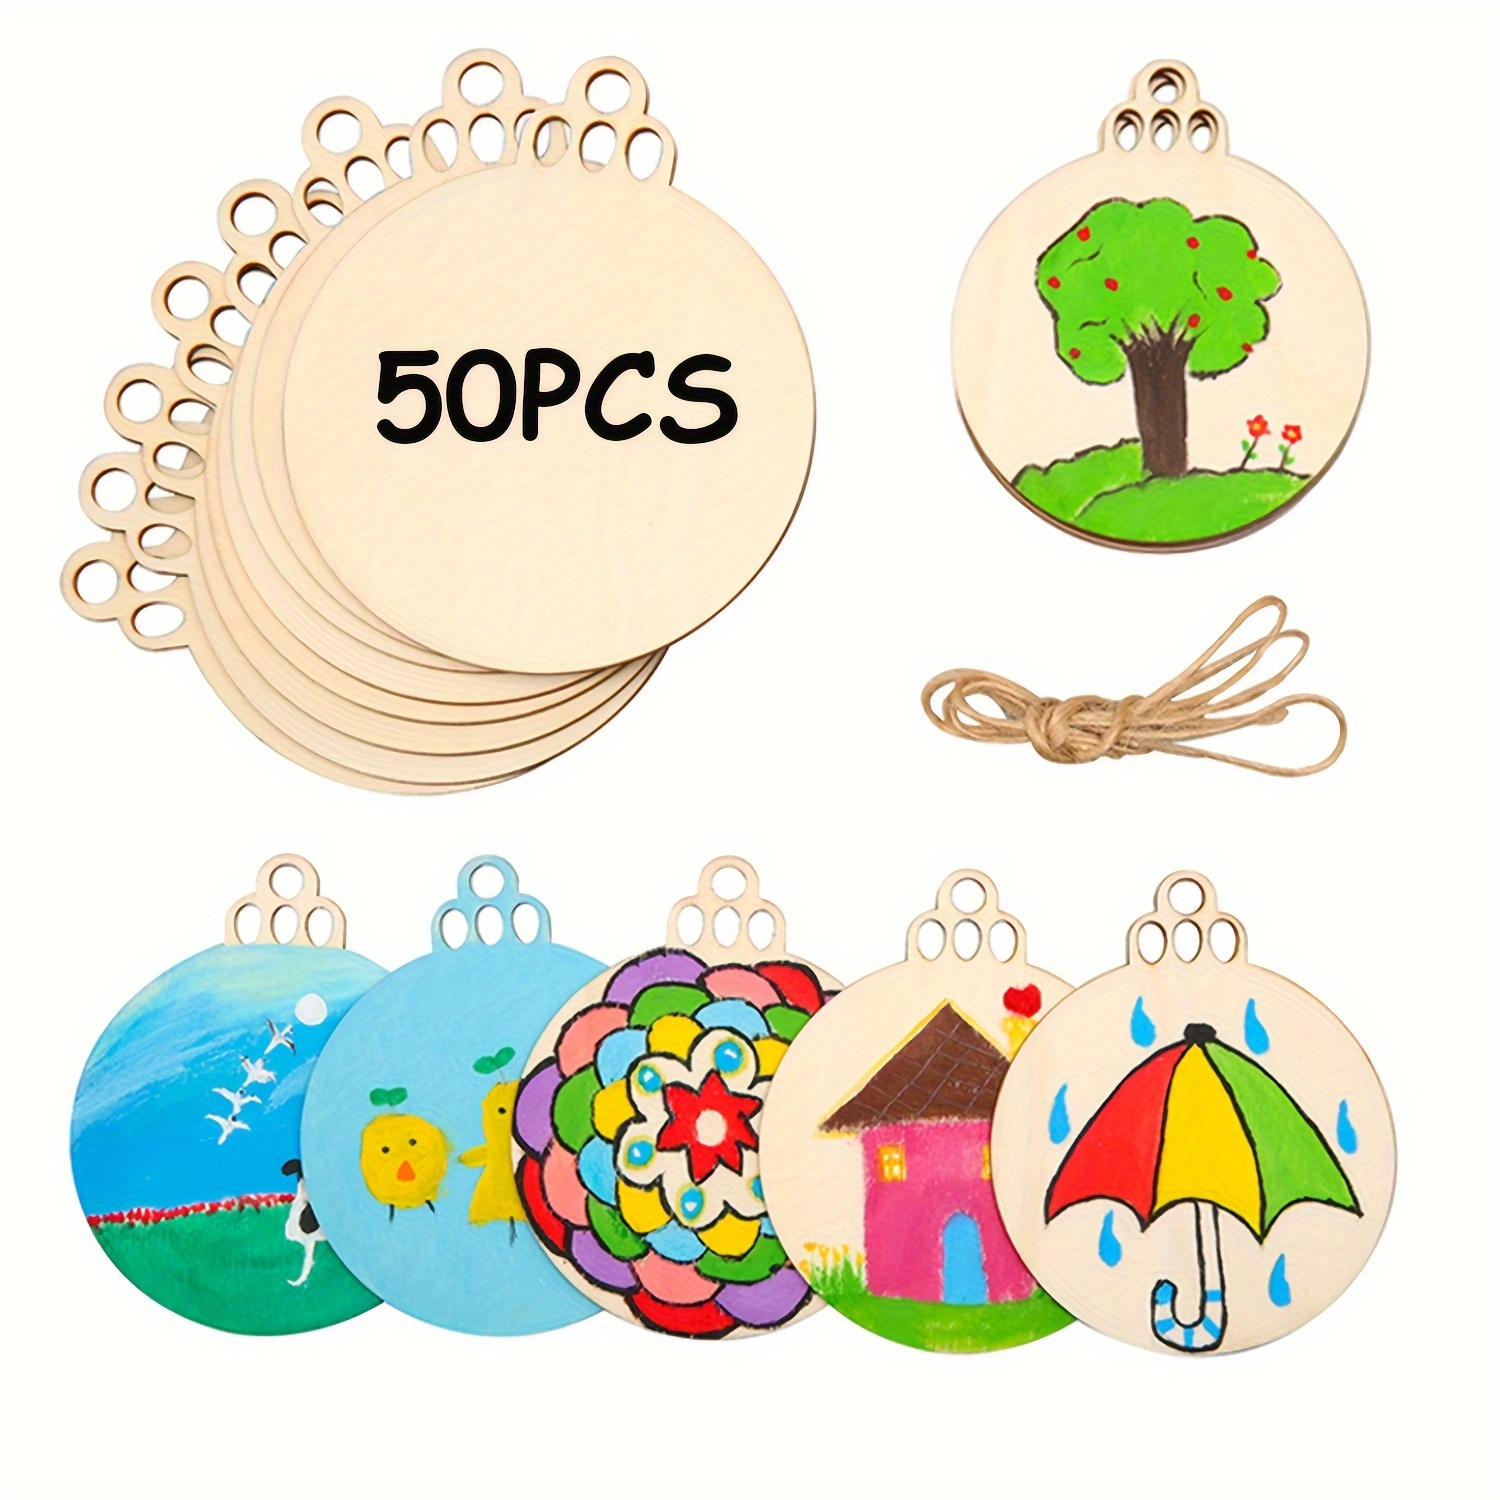 60 Pieces Wooden Snowflake Cutouts Christmas Wood Snowflake Decorations with 60 Pieces Twine Ropes for Kids Crafts Christmas Ornaments (60pcs)